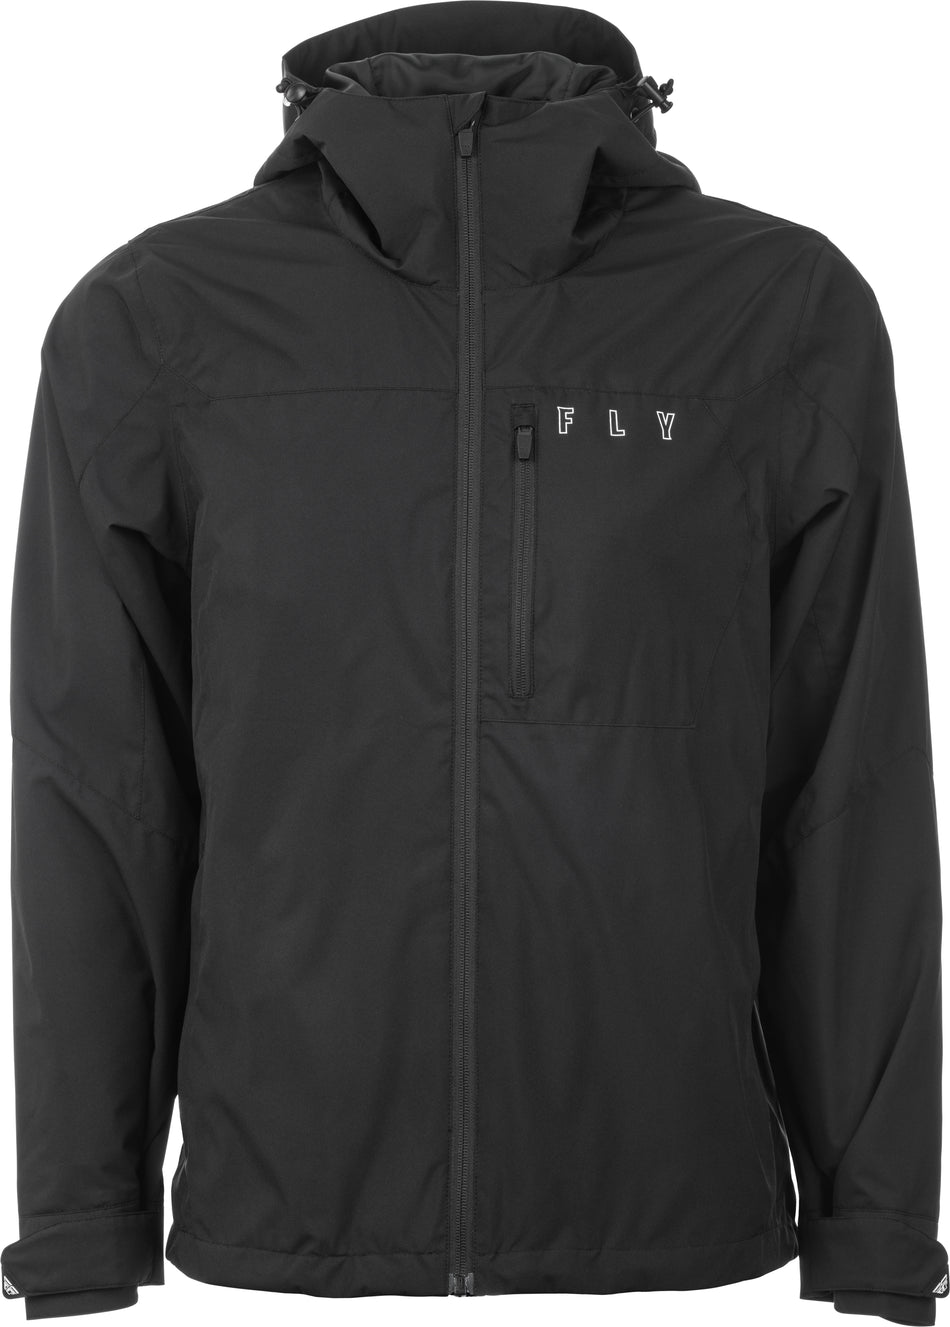 FLY RACING Fly Pit Jacket Black Xl 354-6361X